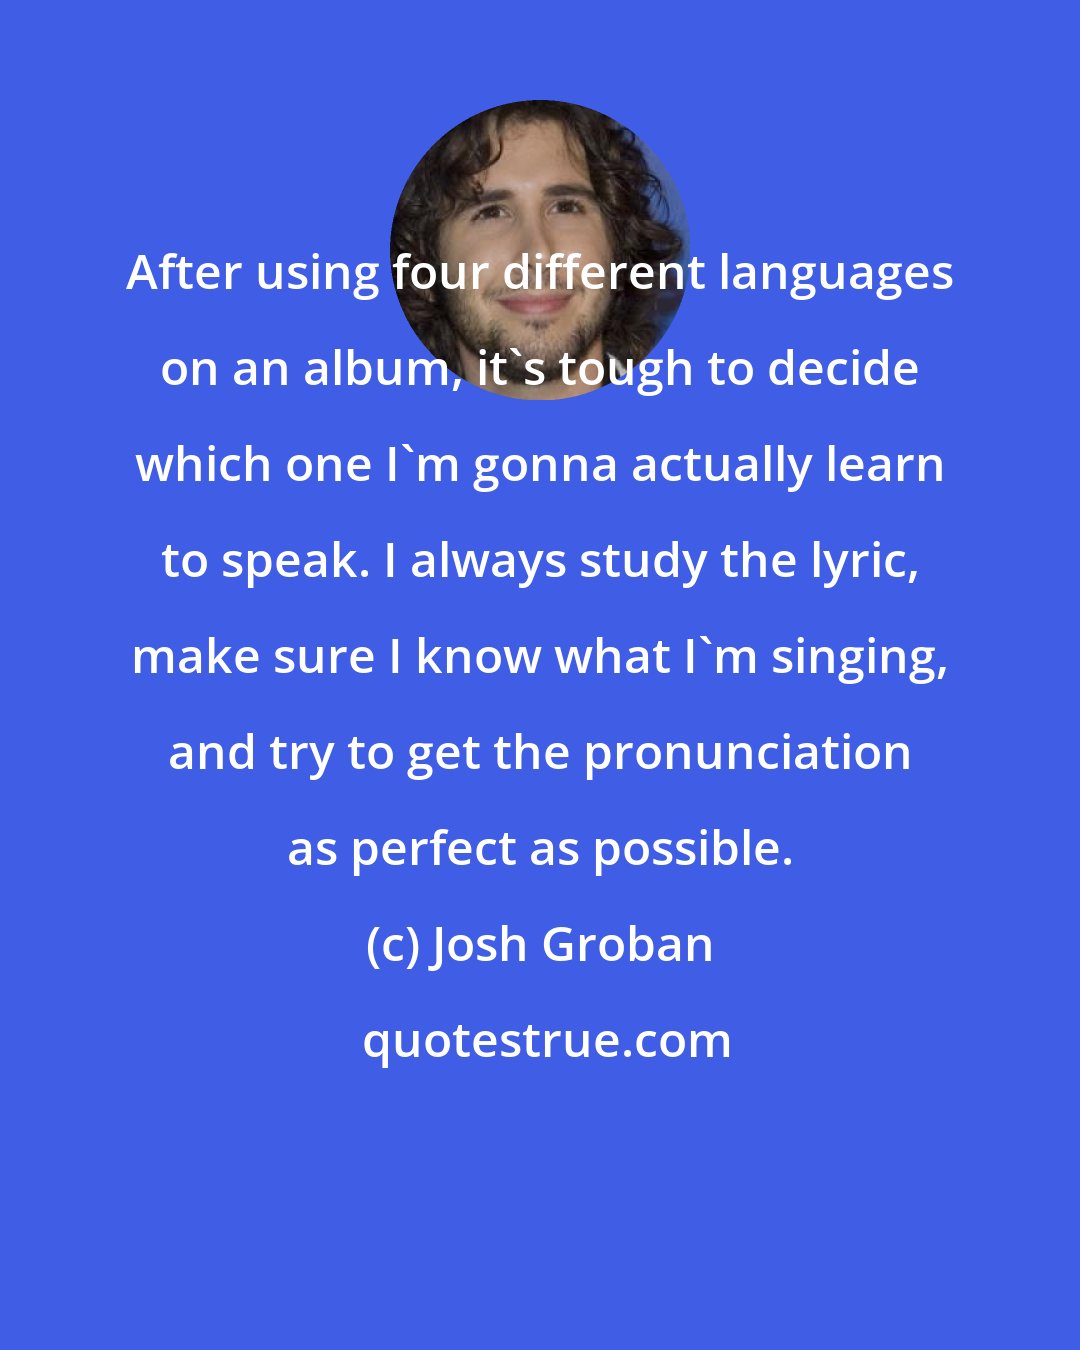 Josh Groban: After using four different languages on an album, it's tough to decide which one I'm gonna actually learn to speak. I always study the lyric, make sure I know what I'm singing, and try to get the pronunciation as perfect as possible.